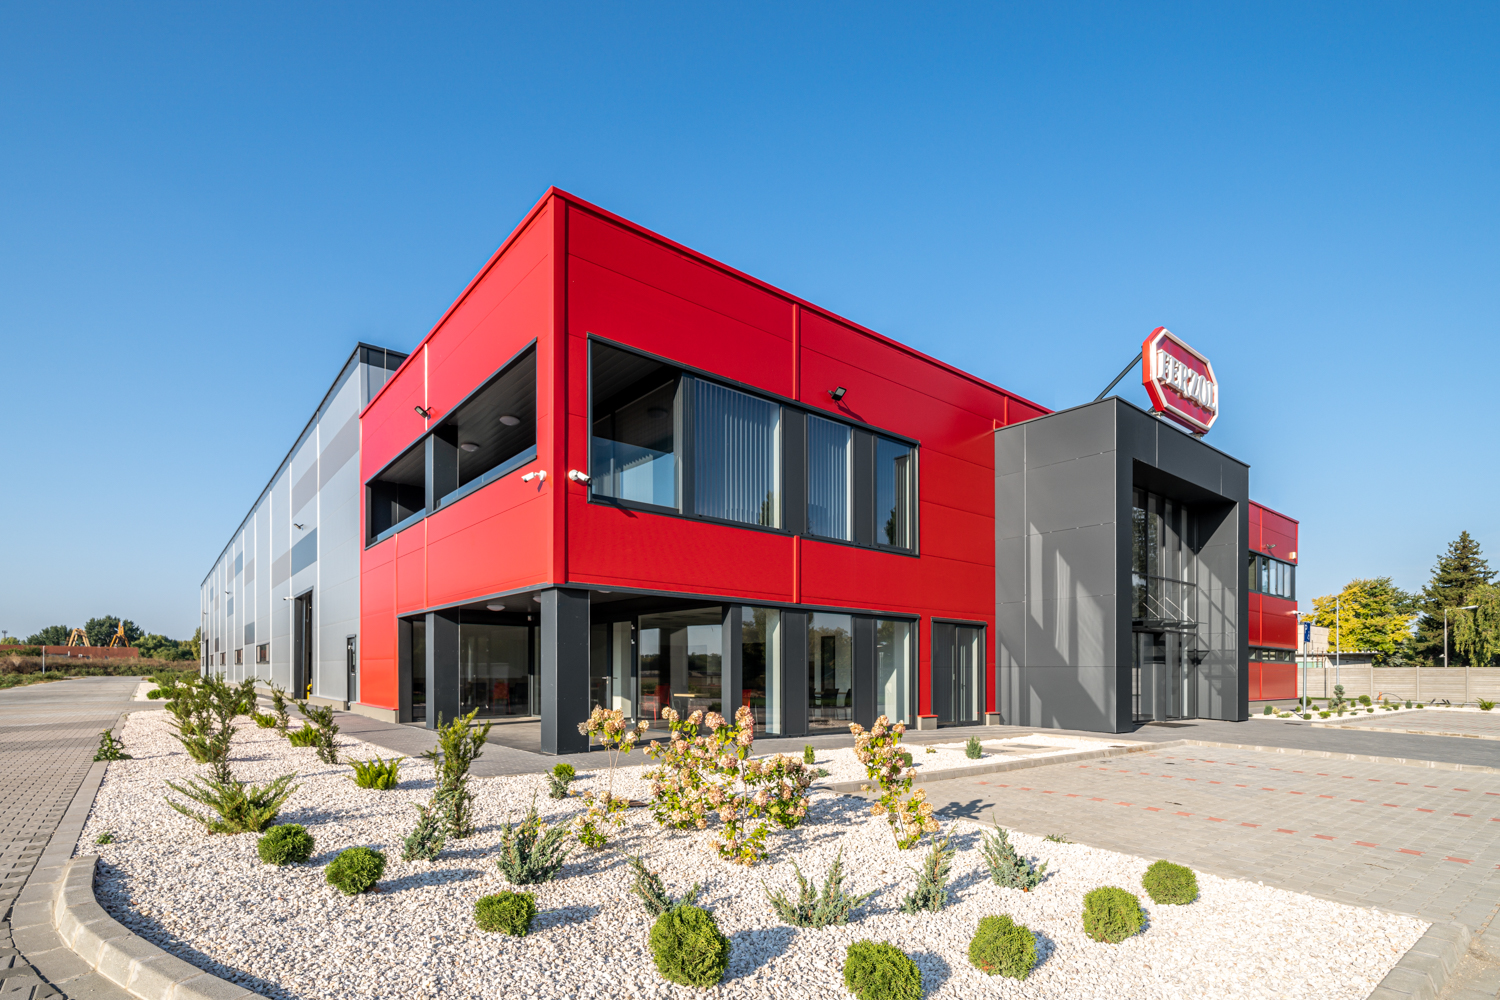 Ferzol Kft.'s newest business site in Szolnok was handed over in 2021